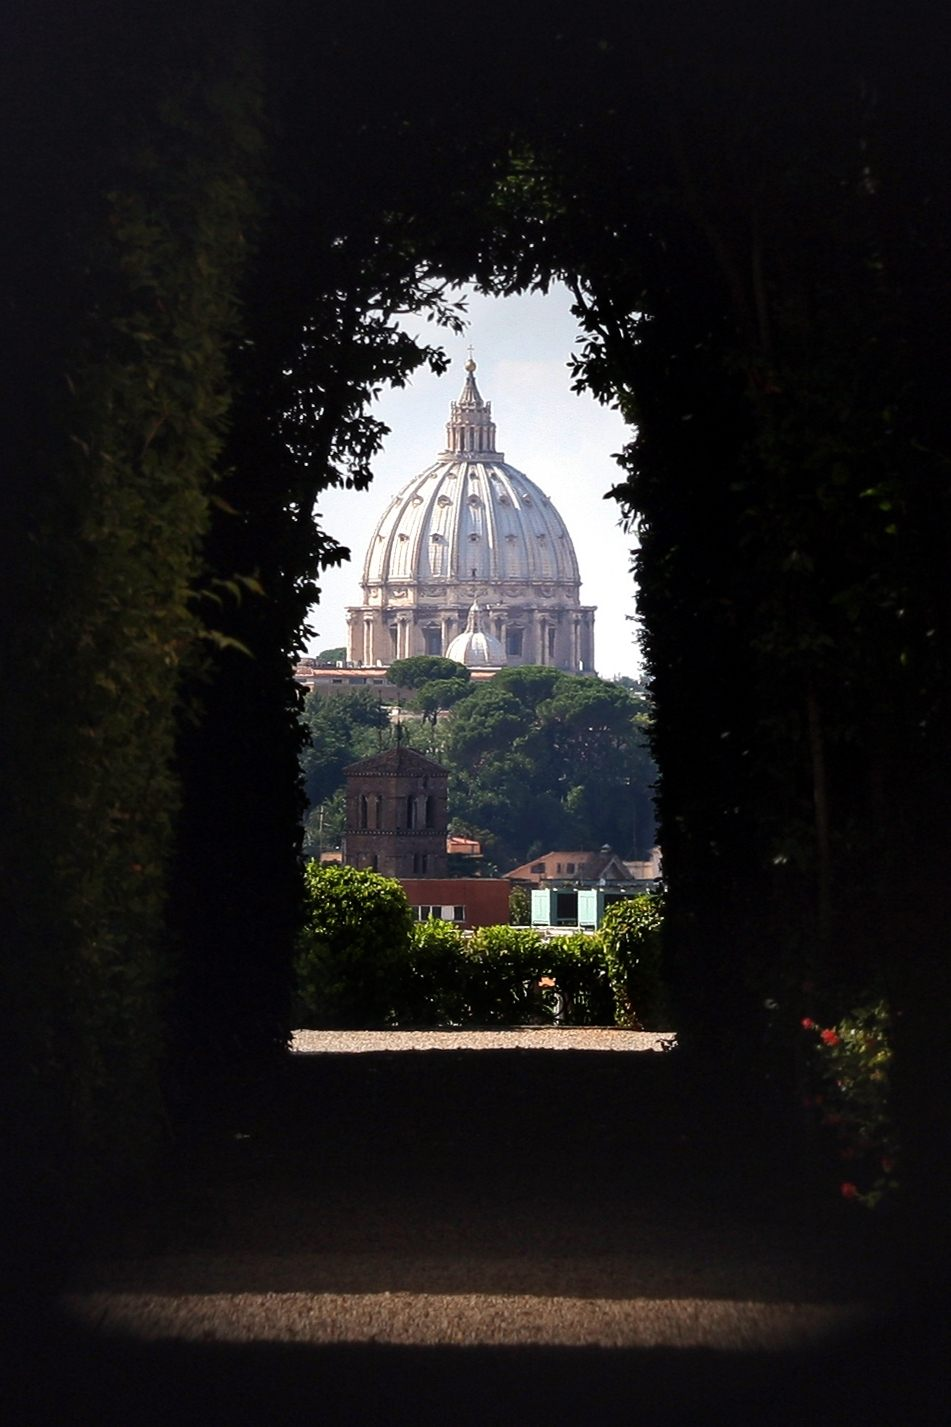 The view from the Aventine Keyhole we visited on our vespa tour